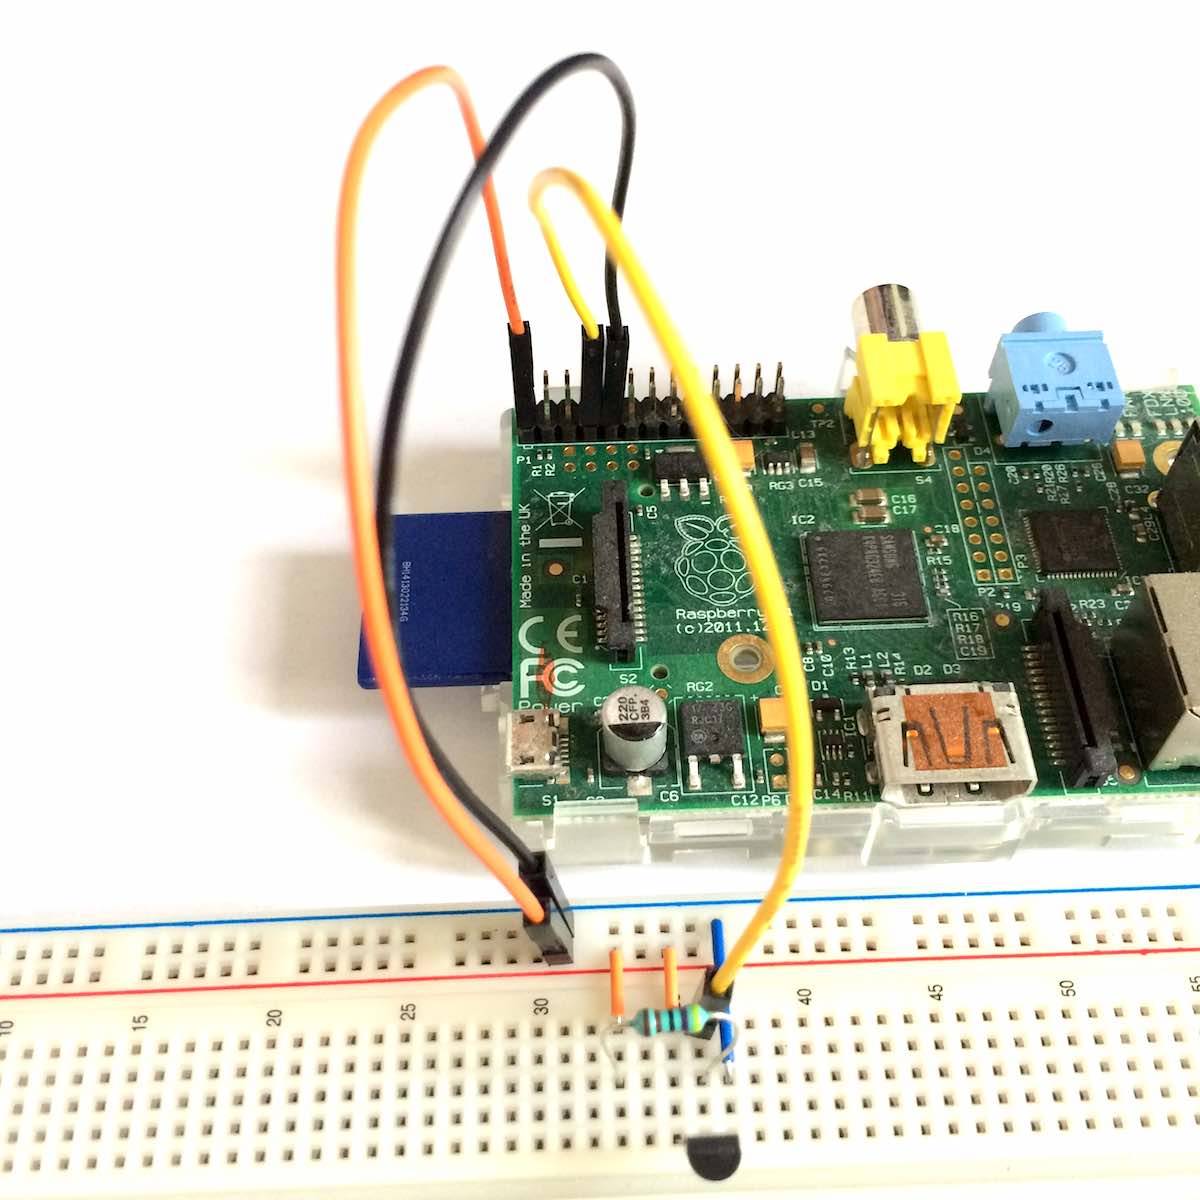 Breadboard and Raspberry GPIO connections